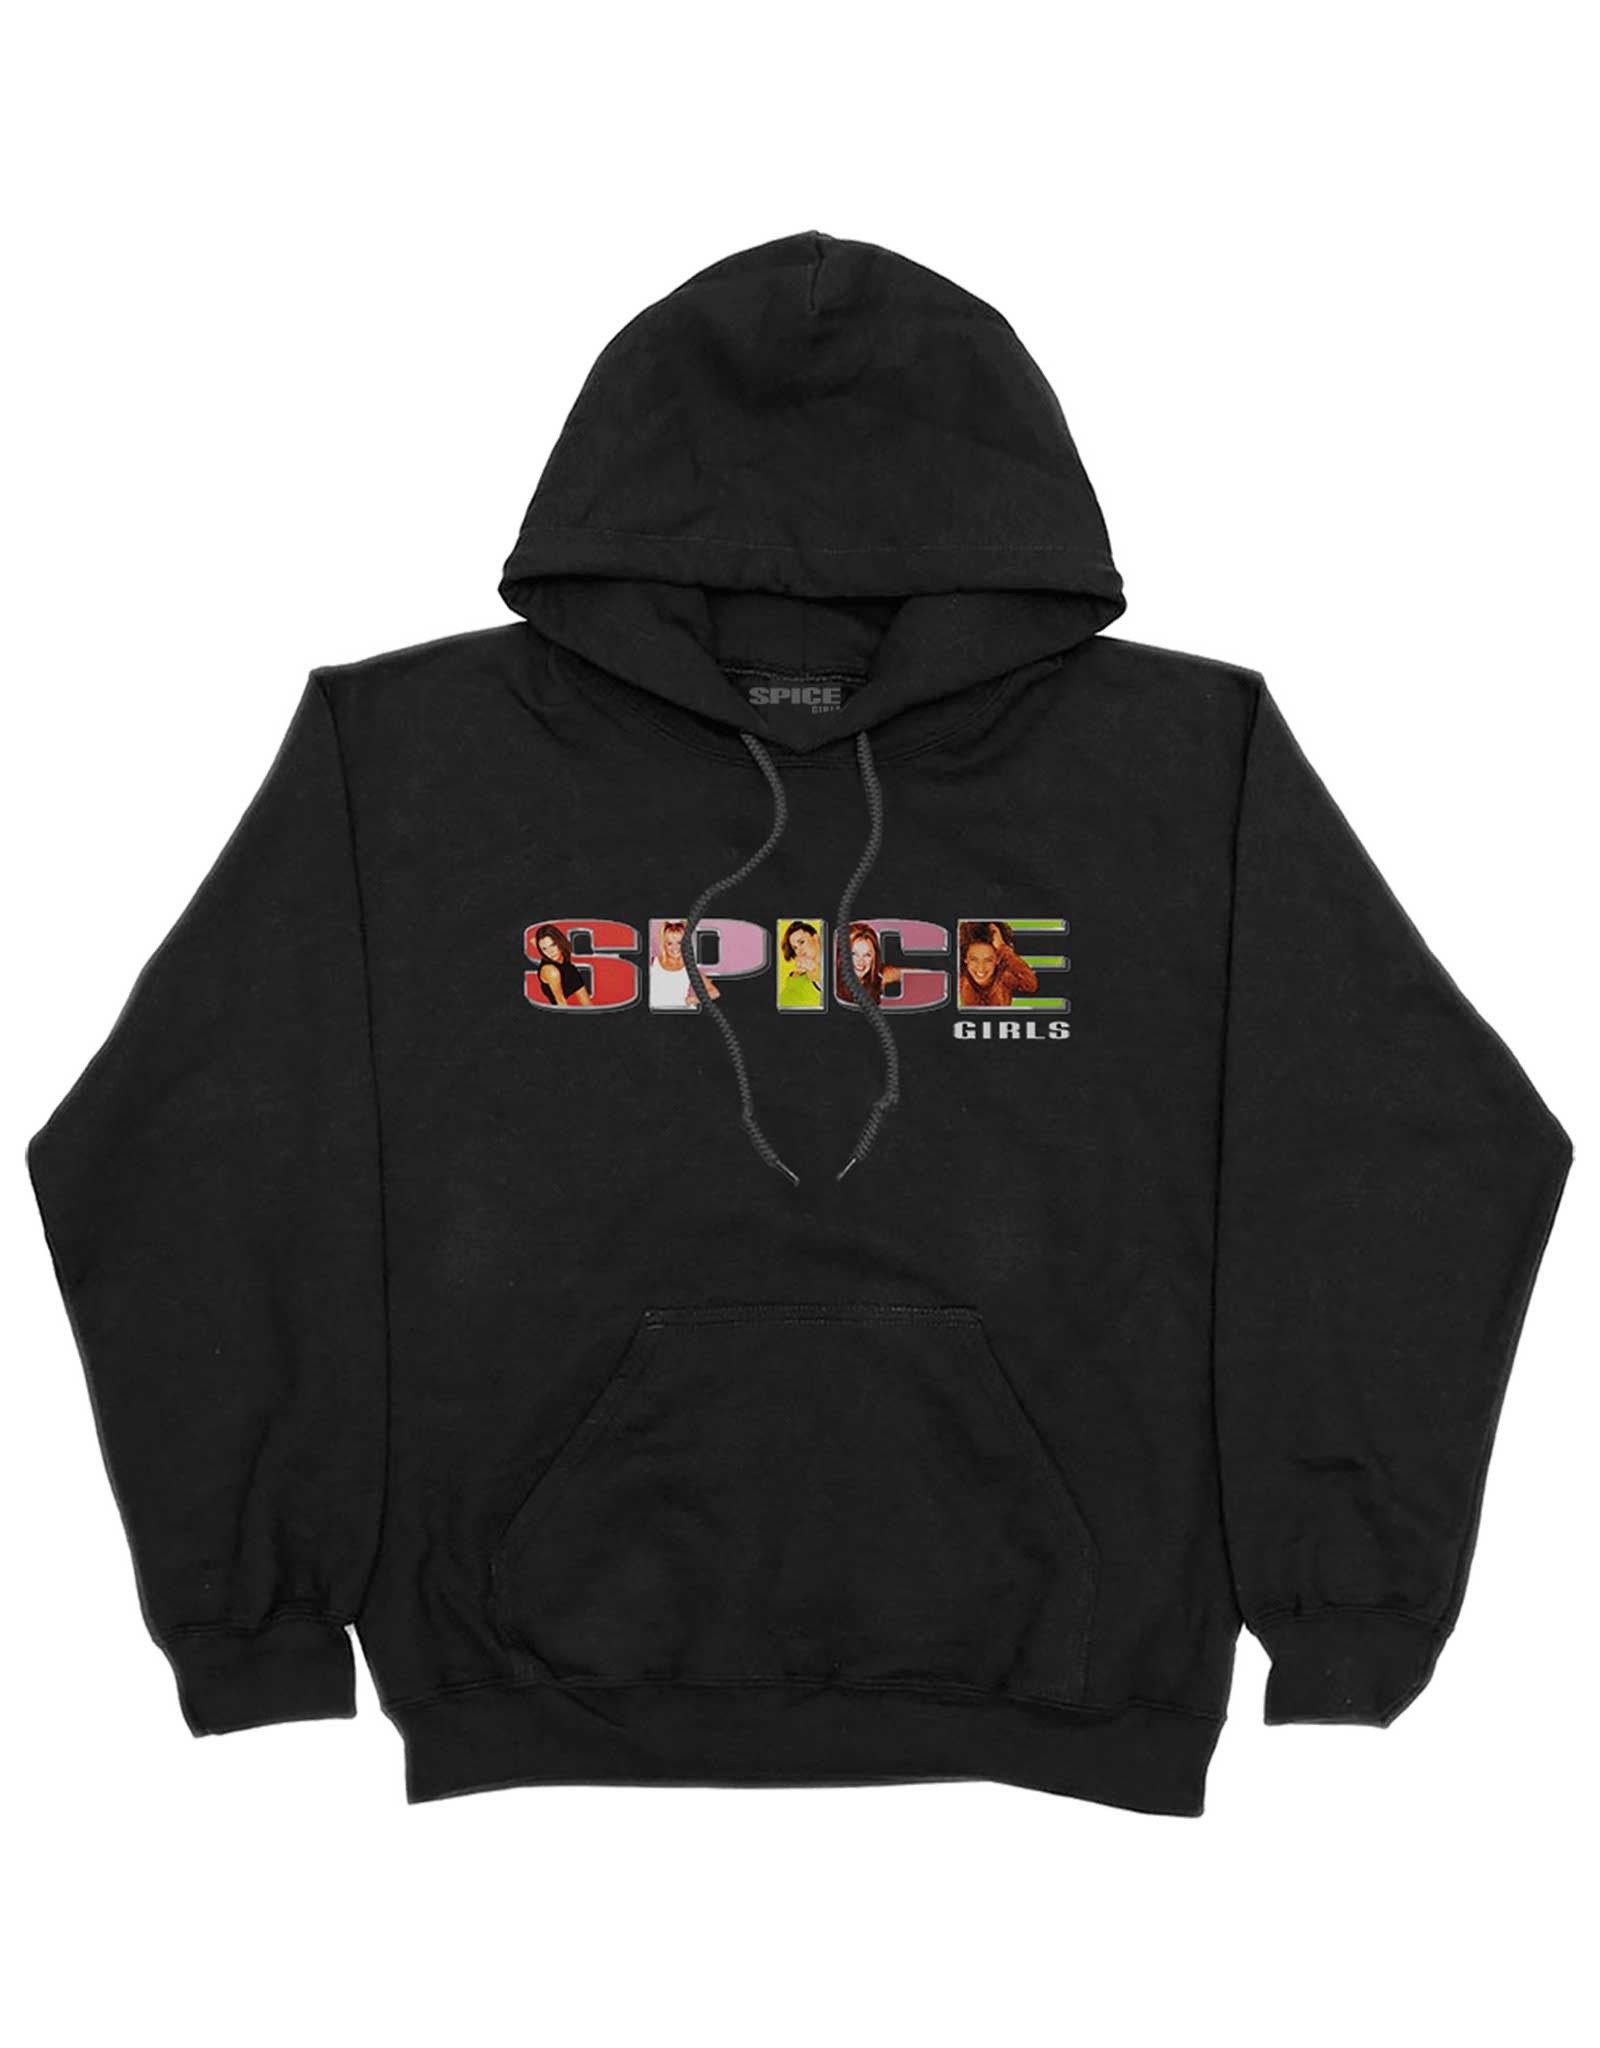 Spice Girls - Classic Logo Hooded Pullover Sweater - Pop Music